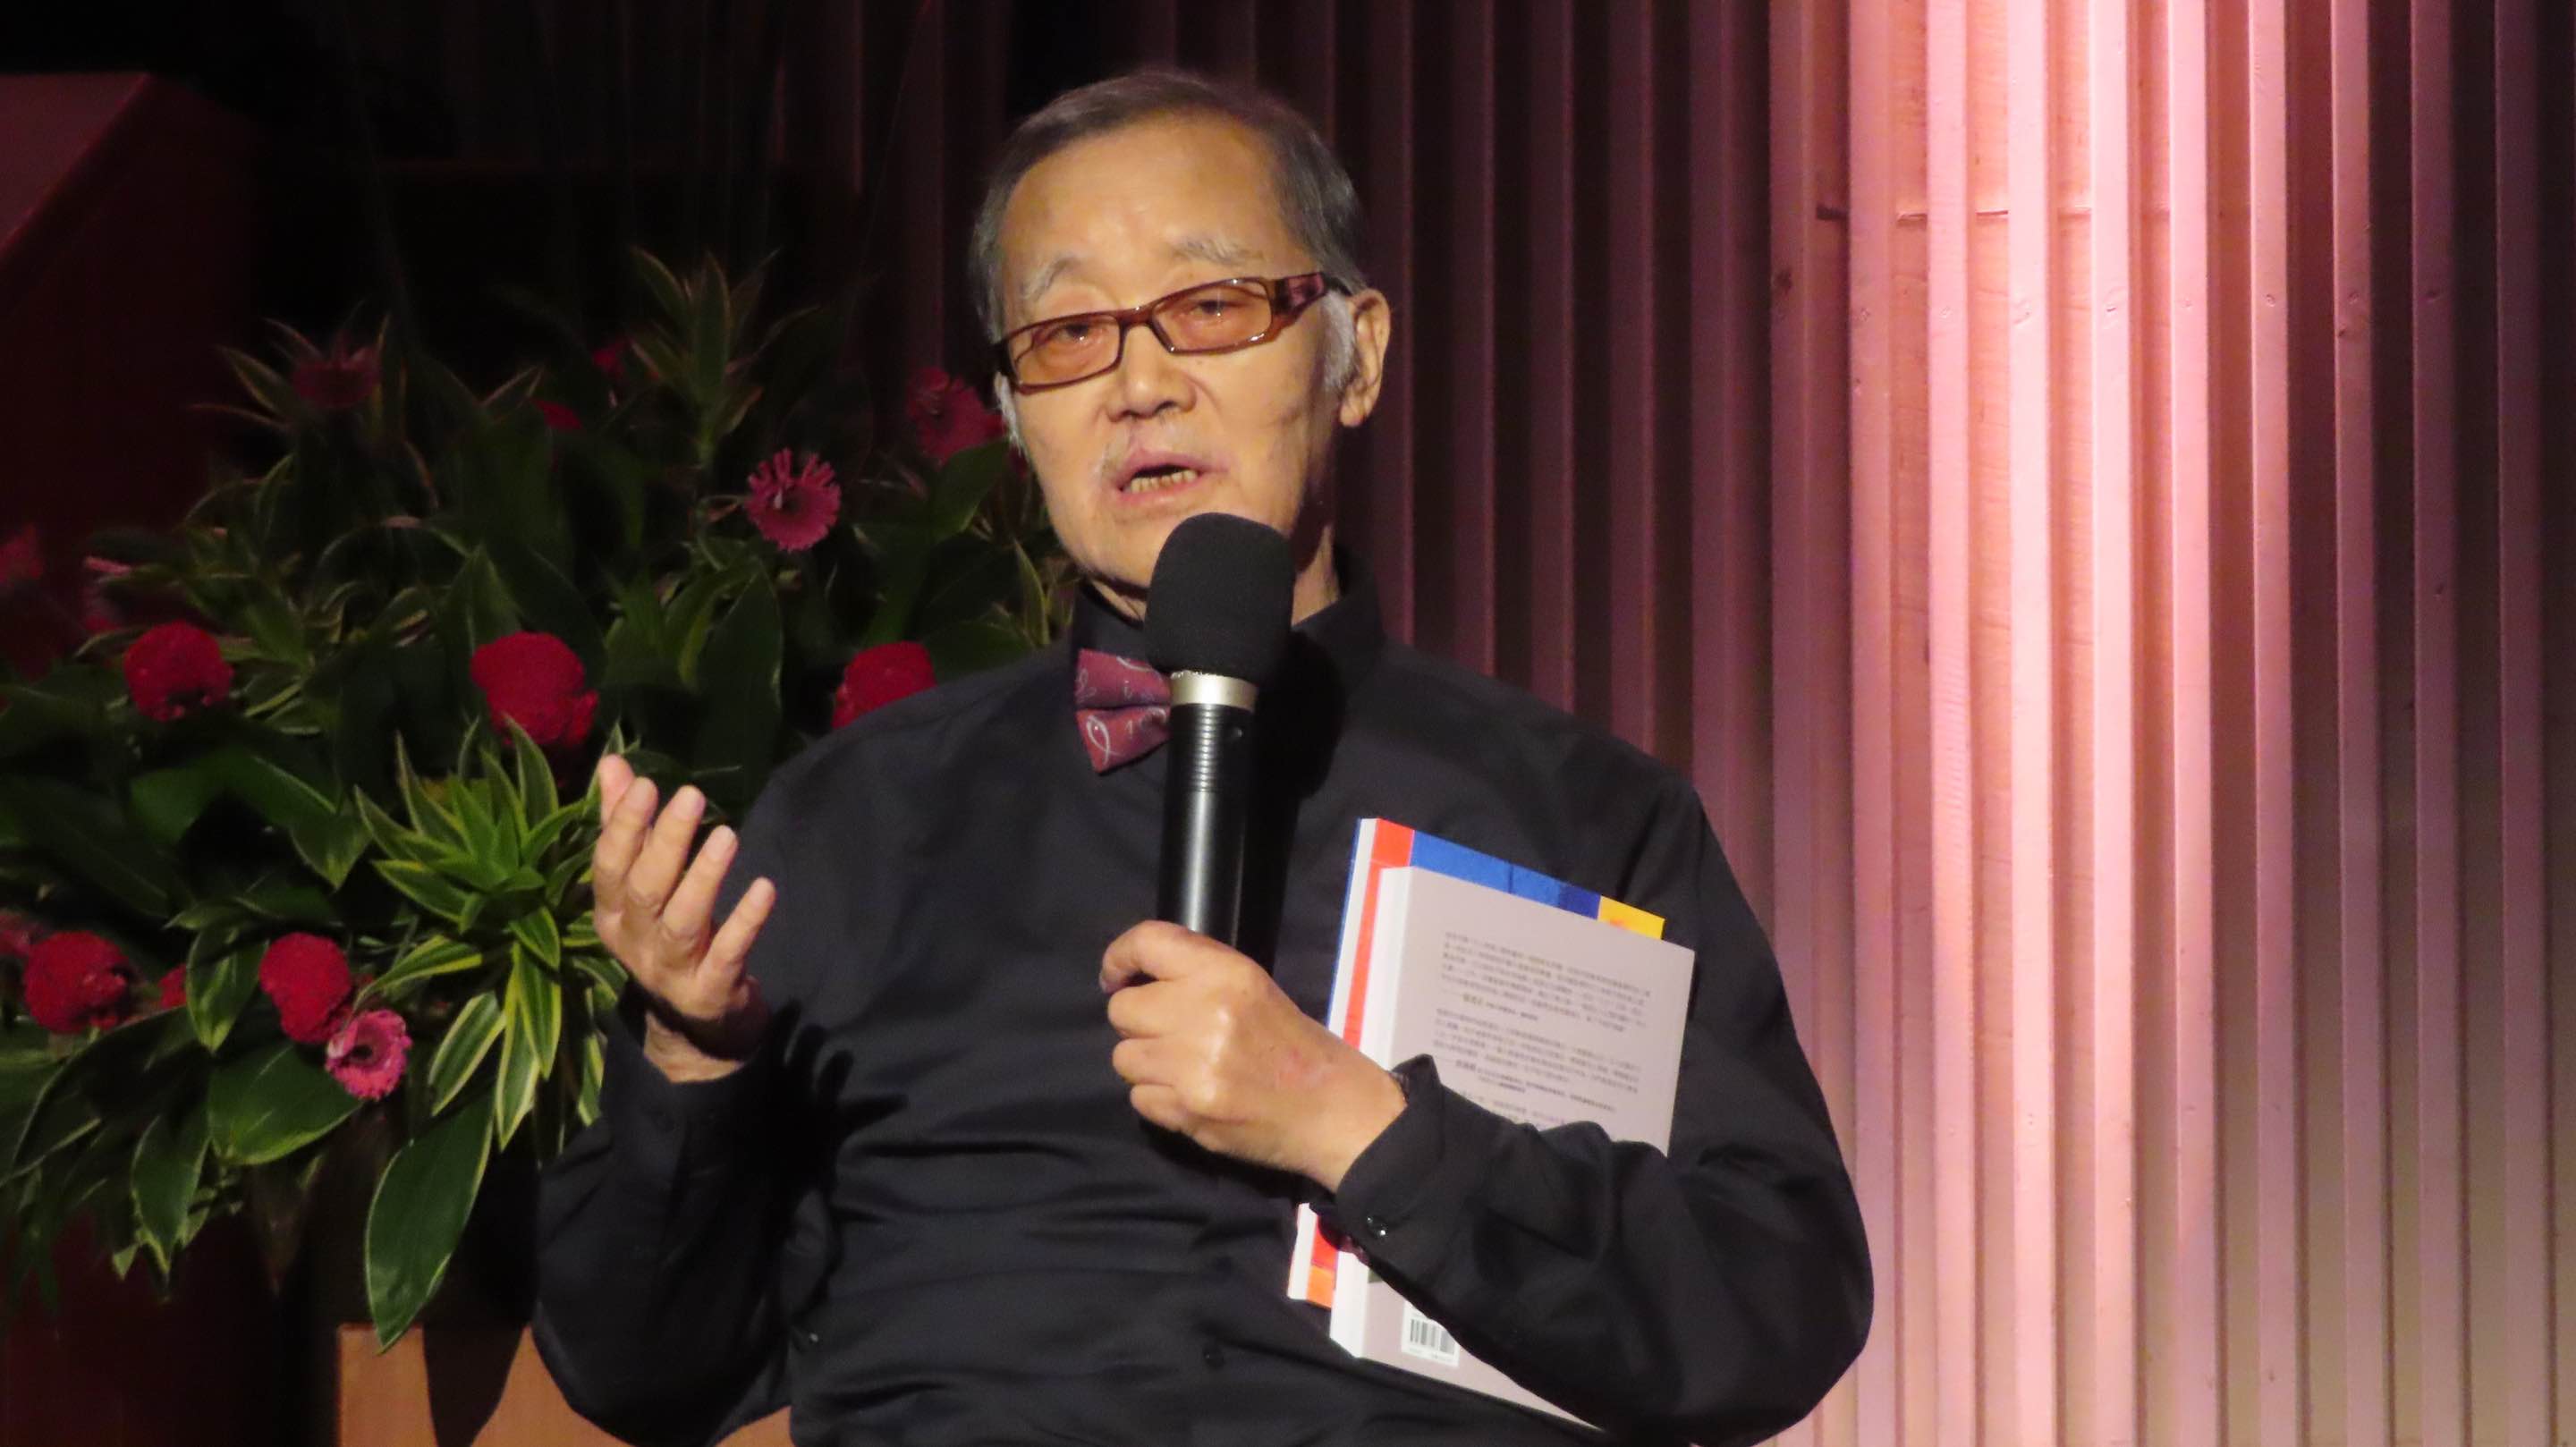 Mr. Lin Chih-Ping, a renowned evangelist and the founder of the Taiwan-based gospel organization Christian Cosmic Light Holistic Care Organization, delivered at the 50th anniversary of Cosmic Light Magazine at an unknown date of 2023. 